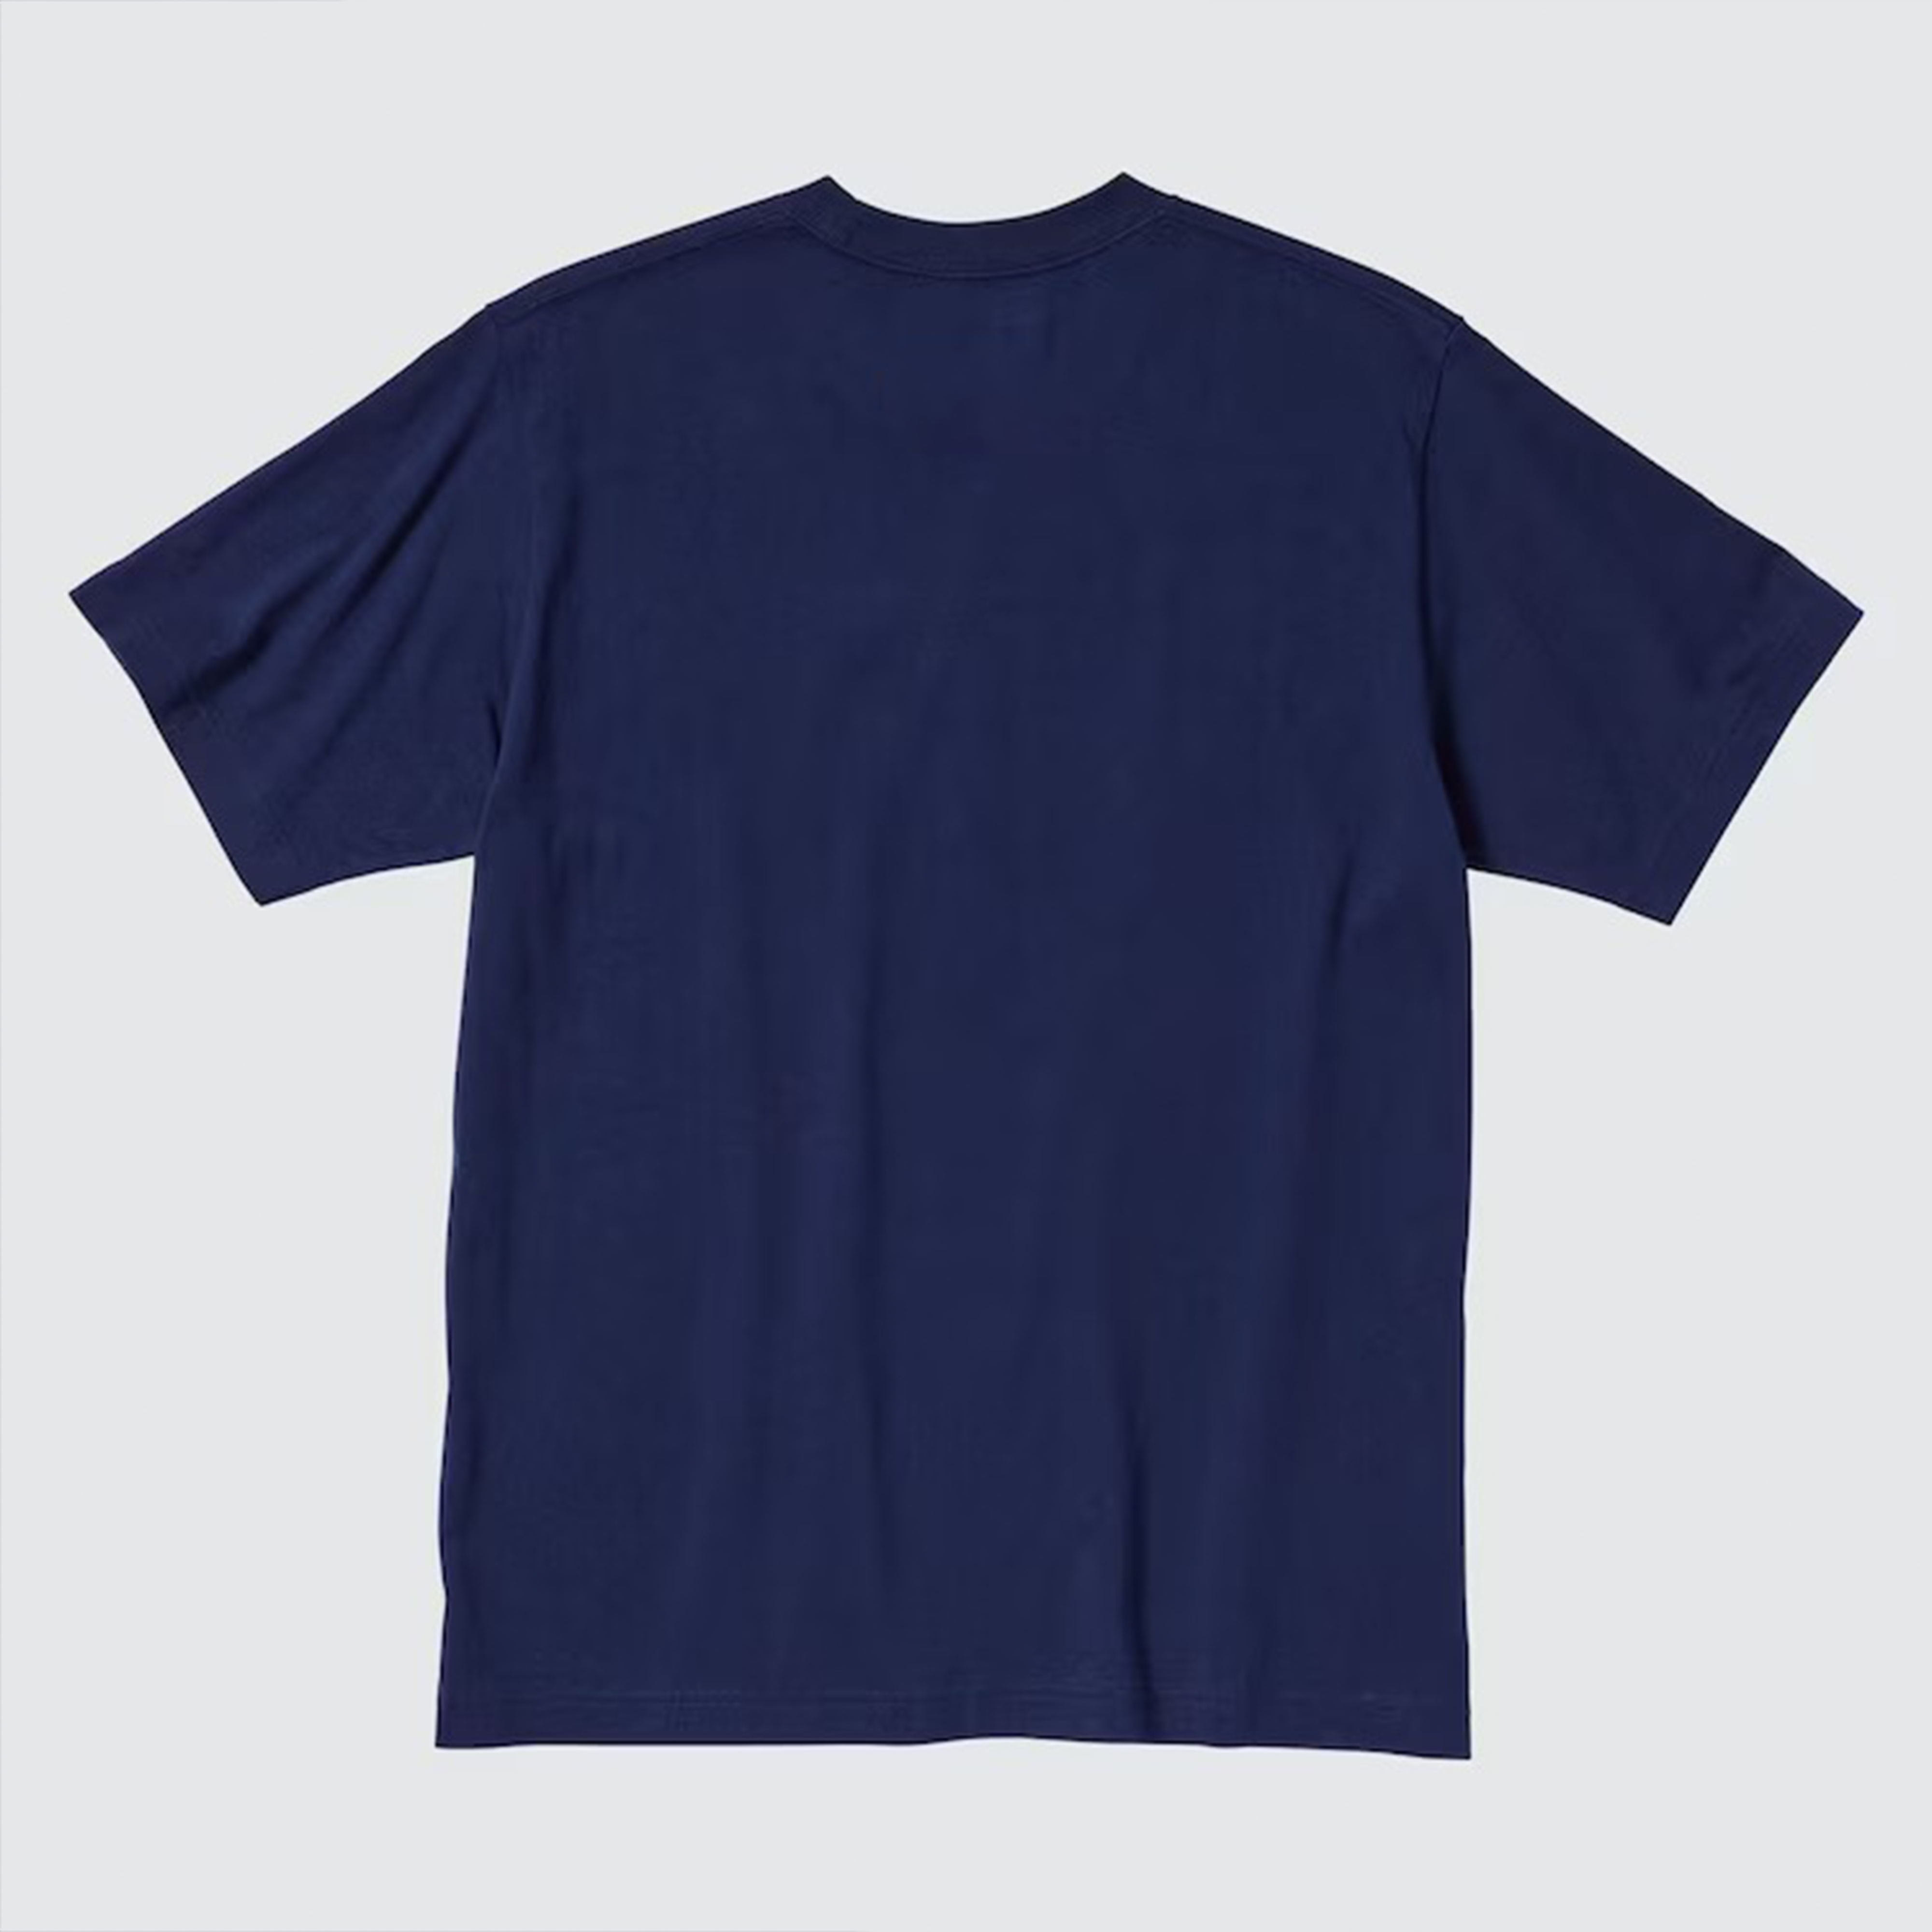 SIMPSON BART SIMPSON'S GUIDE TO LIFE T-SHIRT / NAVY